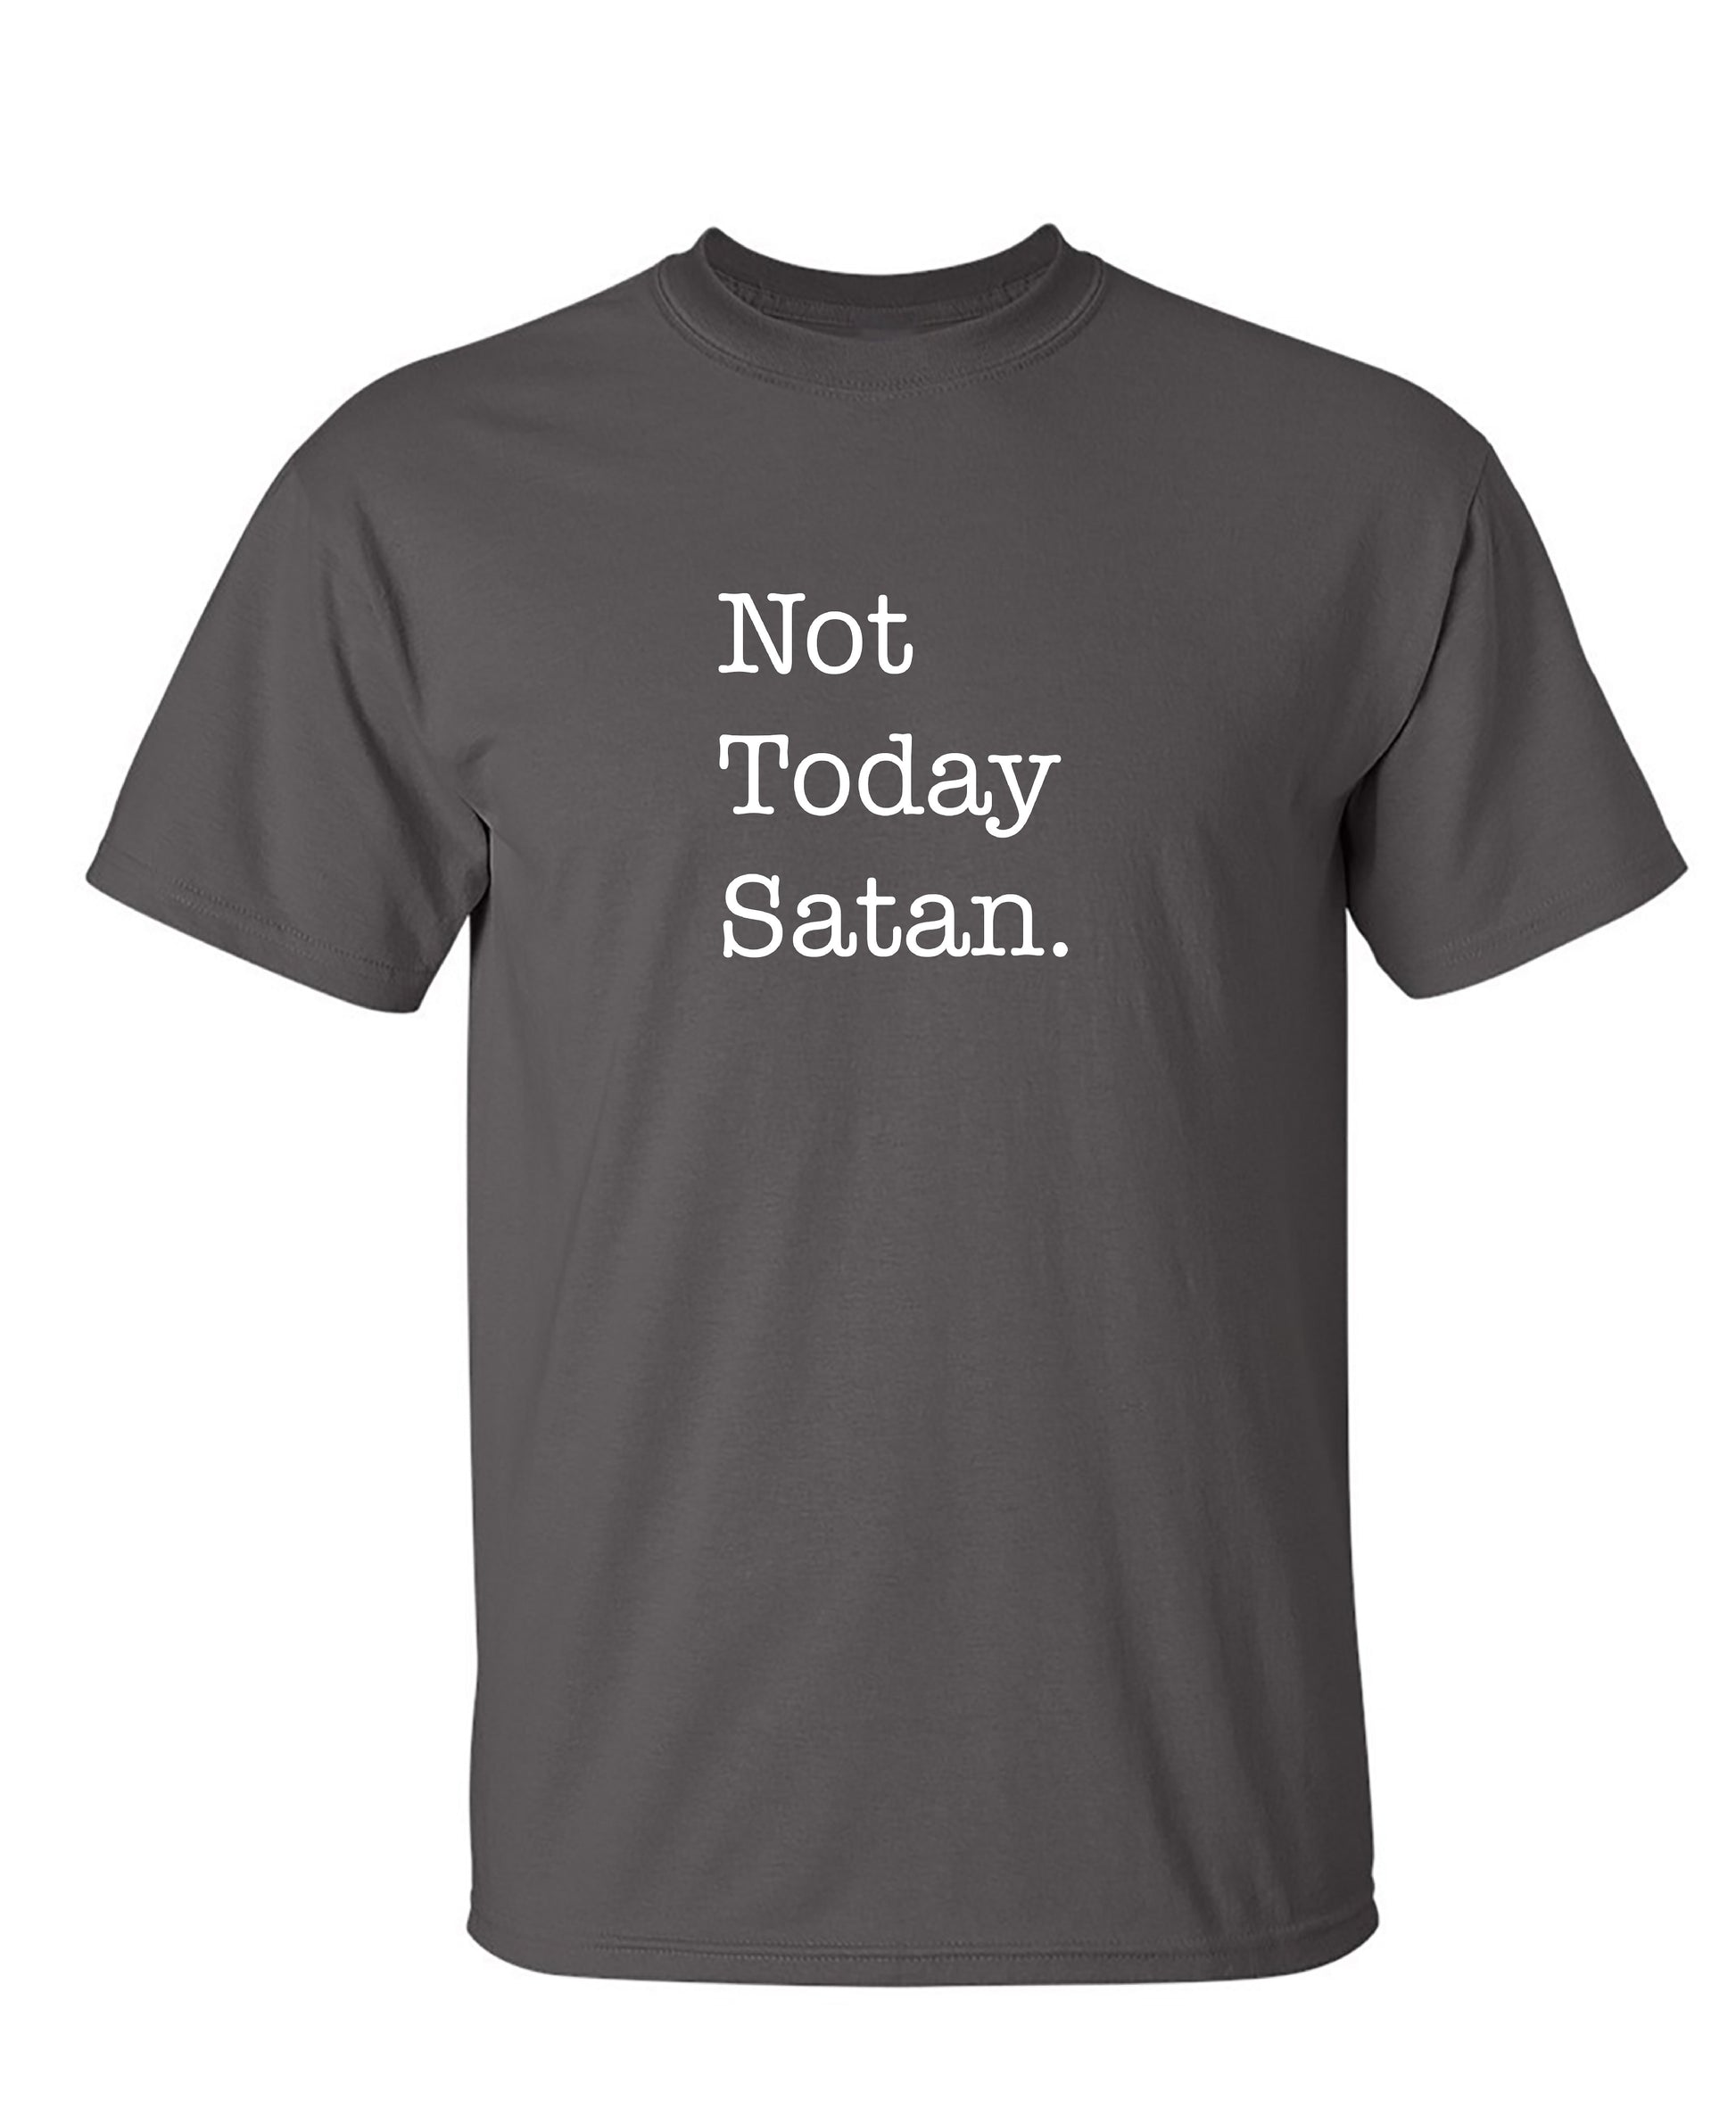 Not Today Satan. - Funny T Shirts & Graphic Tees